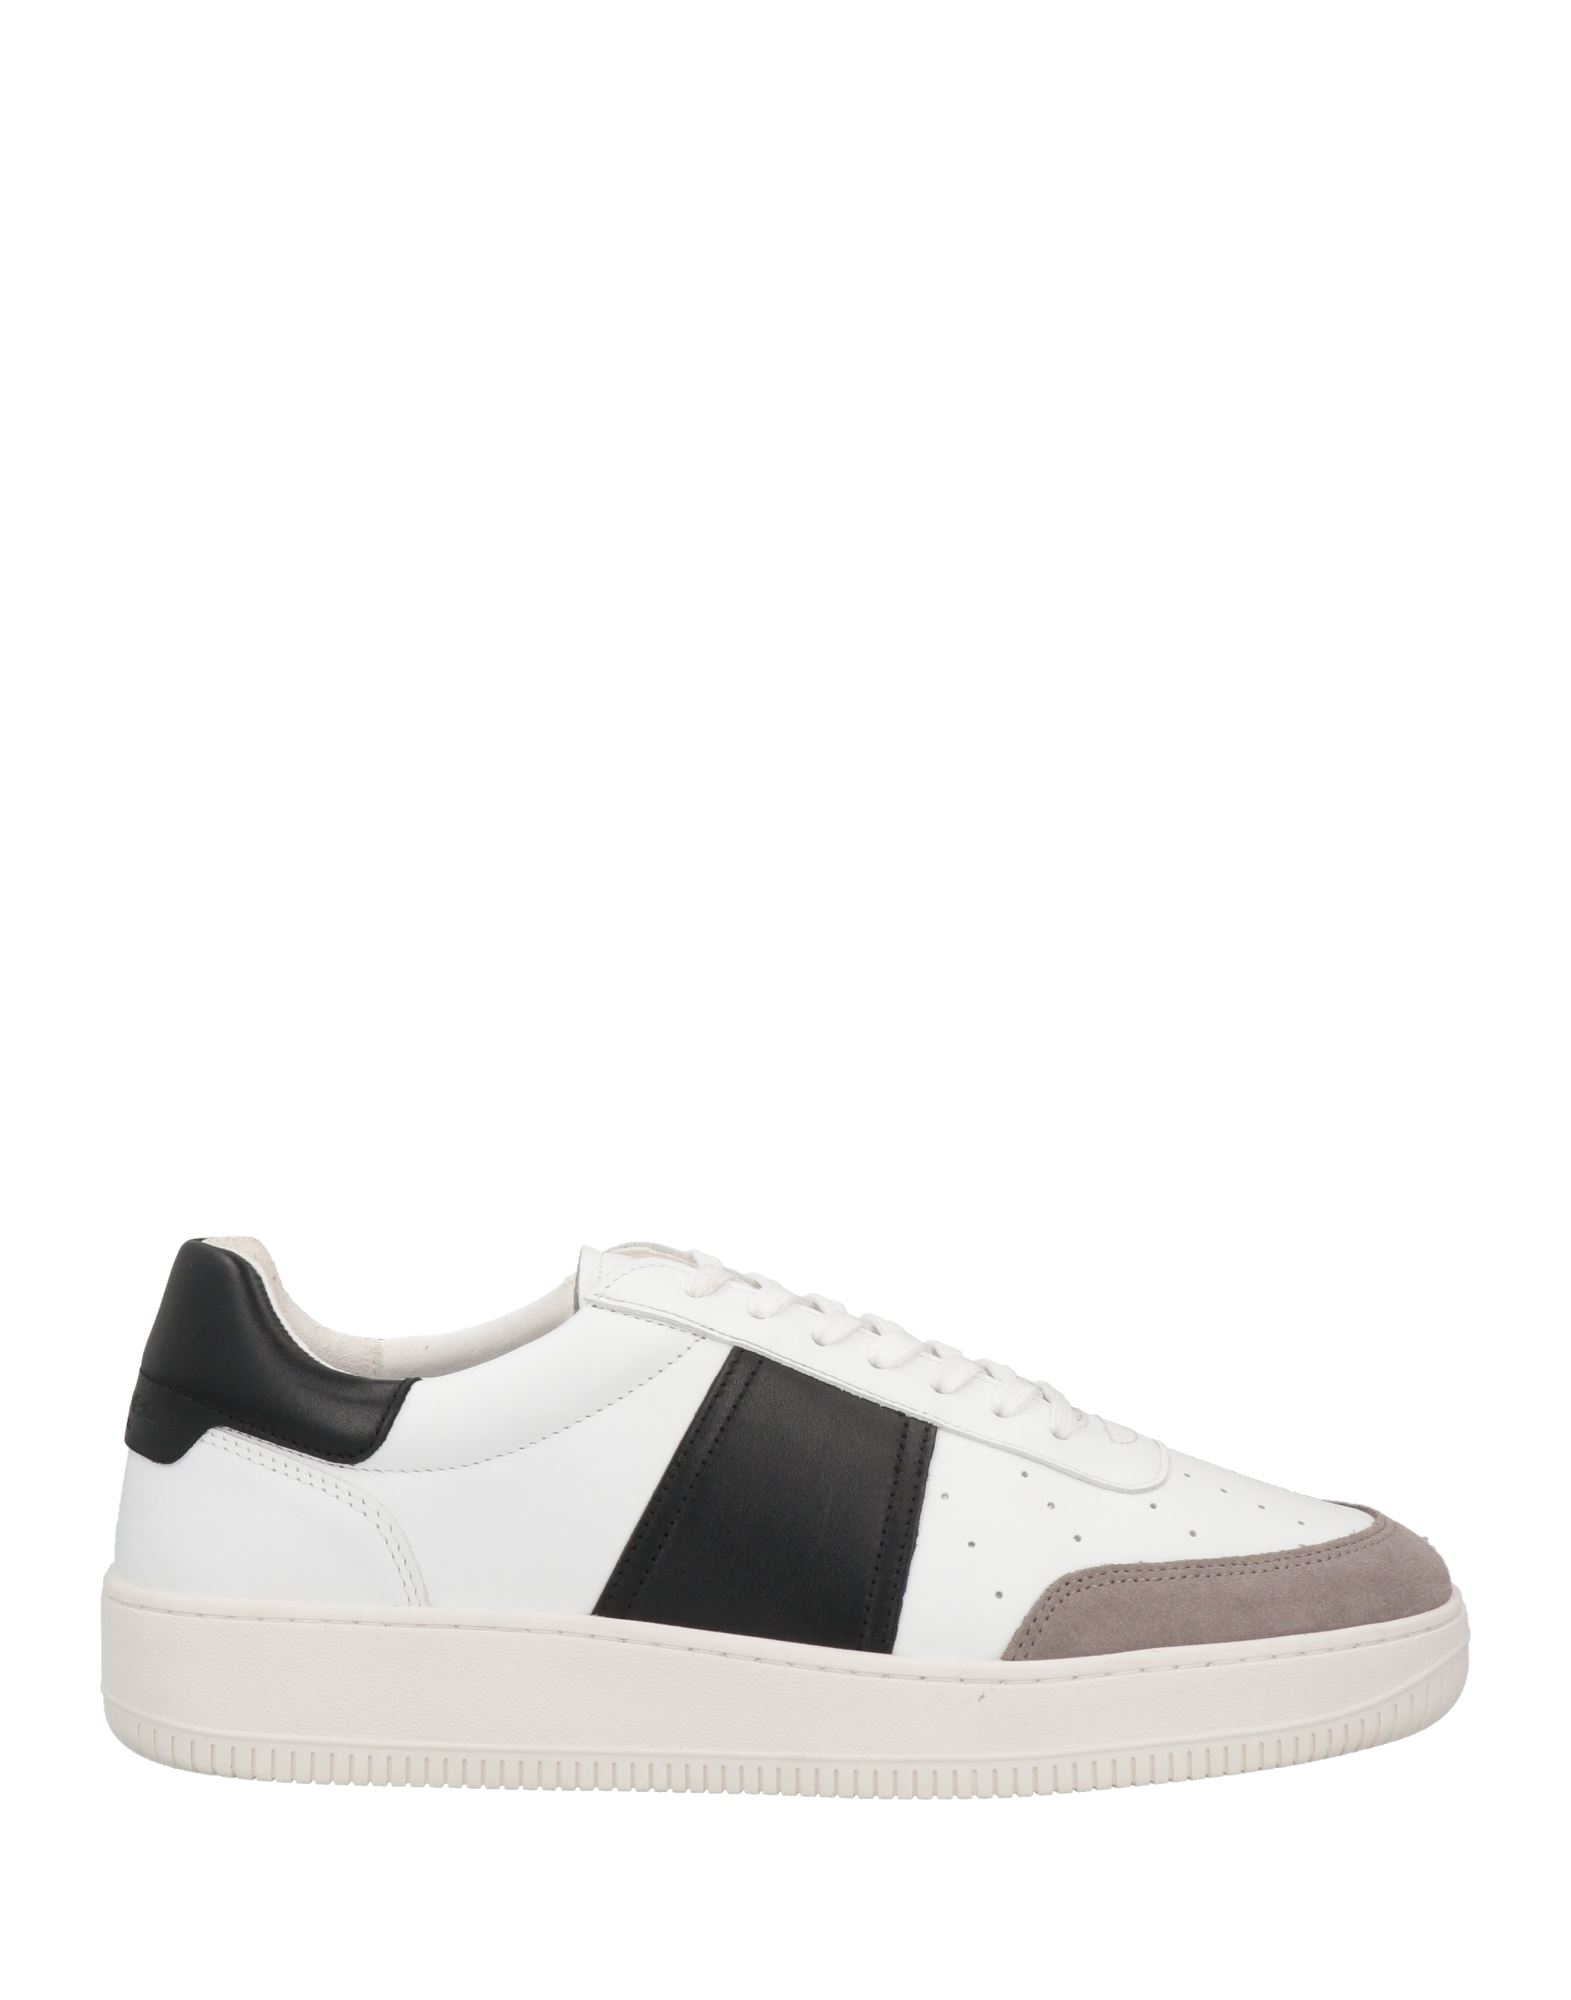 Sandro Leather Panelled Sneakers In White | ModeSens